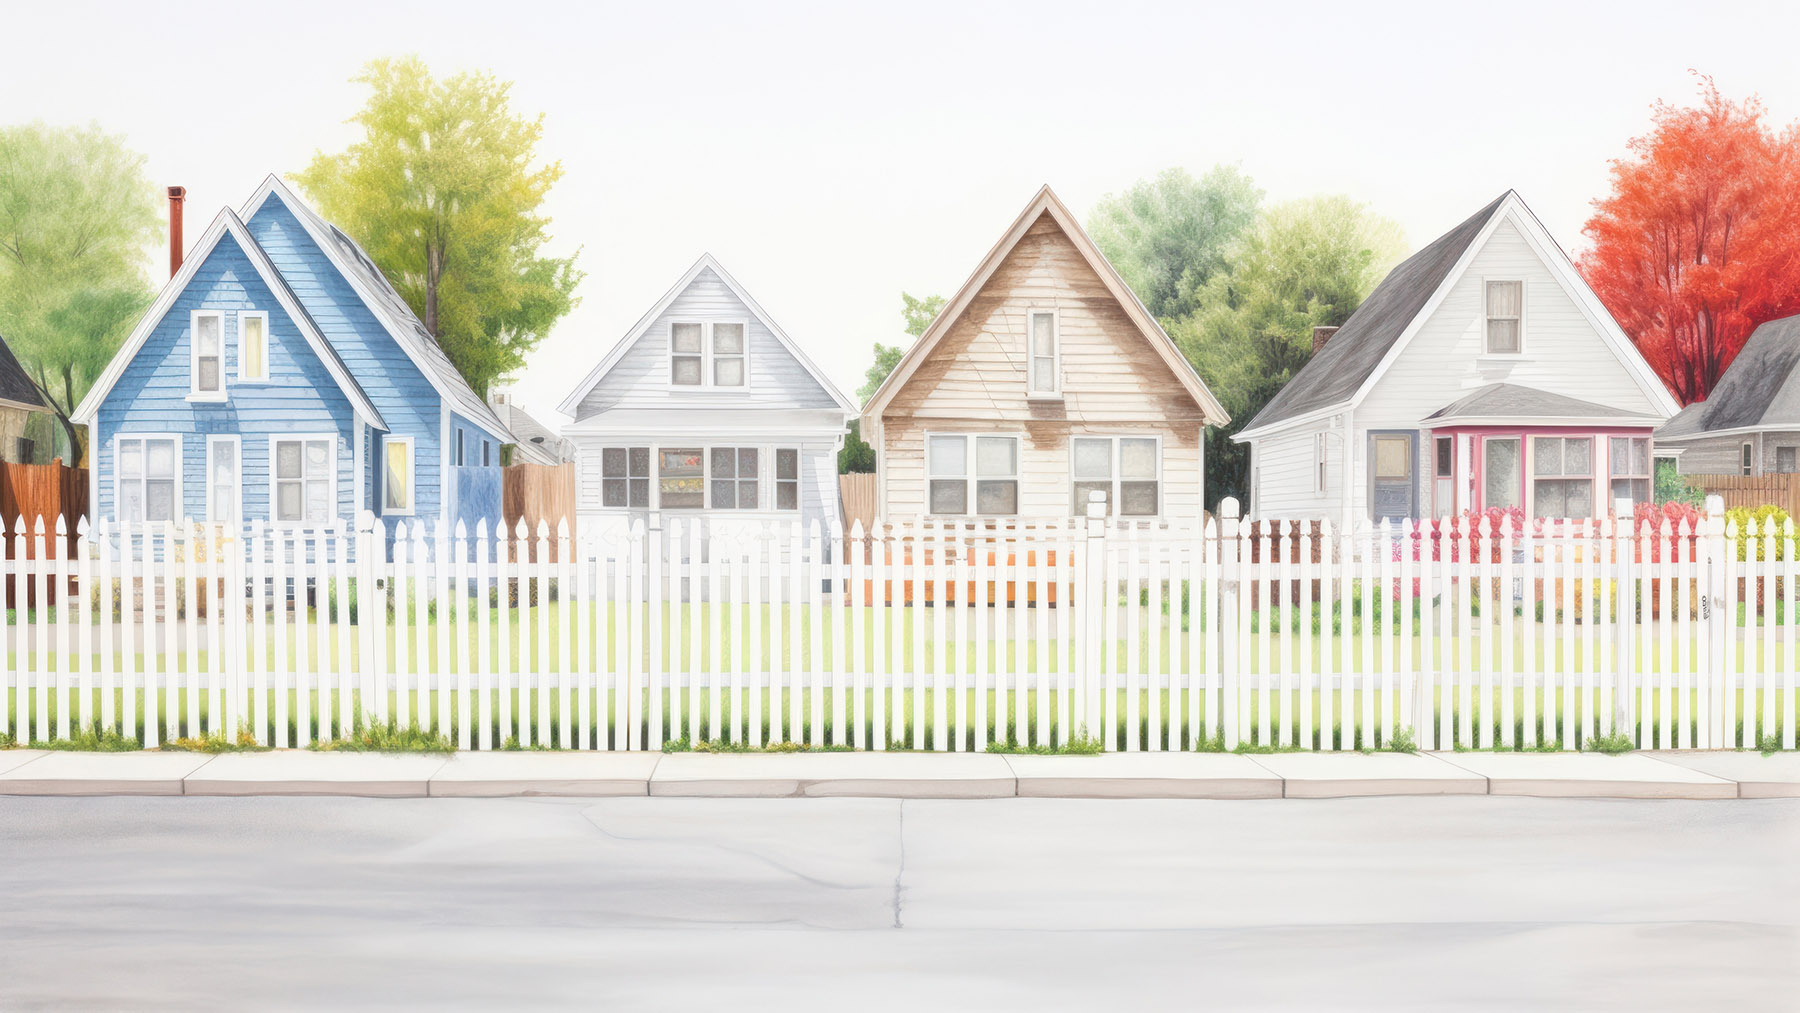 Colored pencil drawing of a row of houses behind a picket fence (Stock image by RawPixel.com)